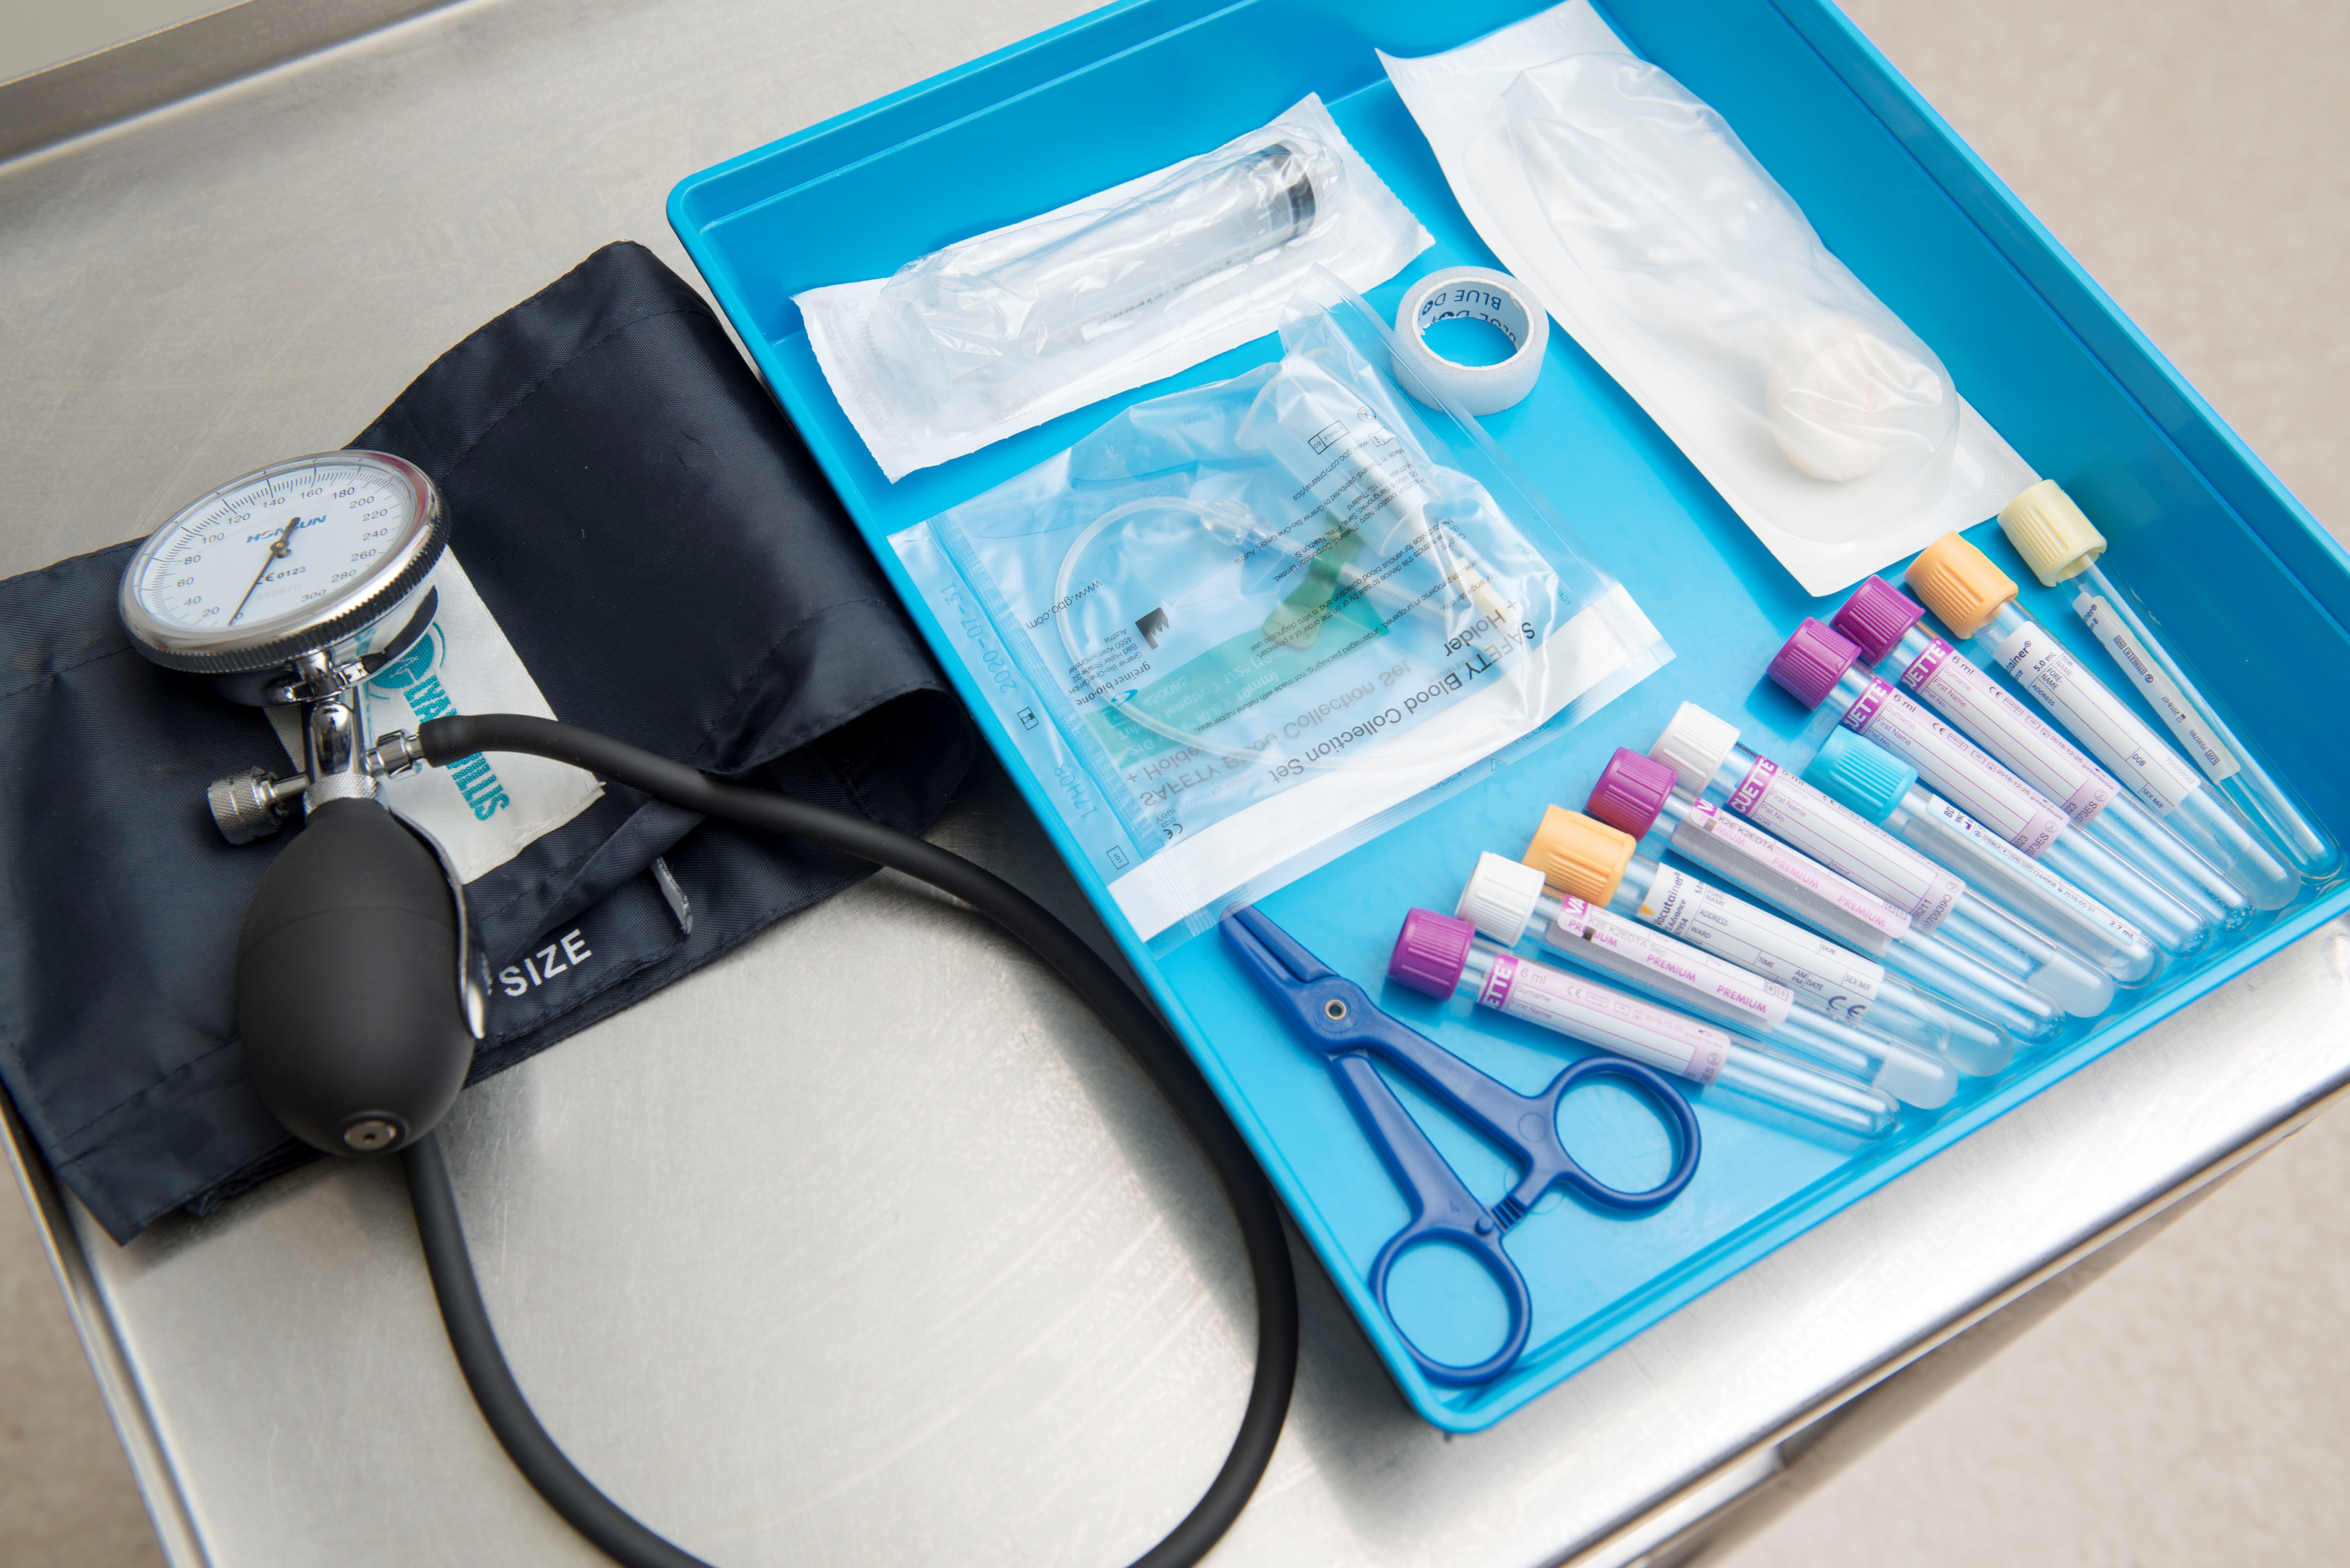 A tray of medical equipment including vials, scissors and a stethoscope